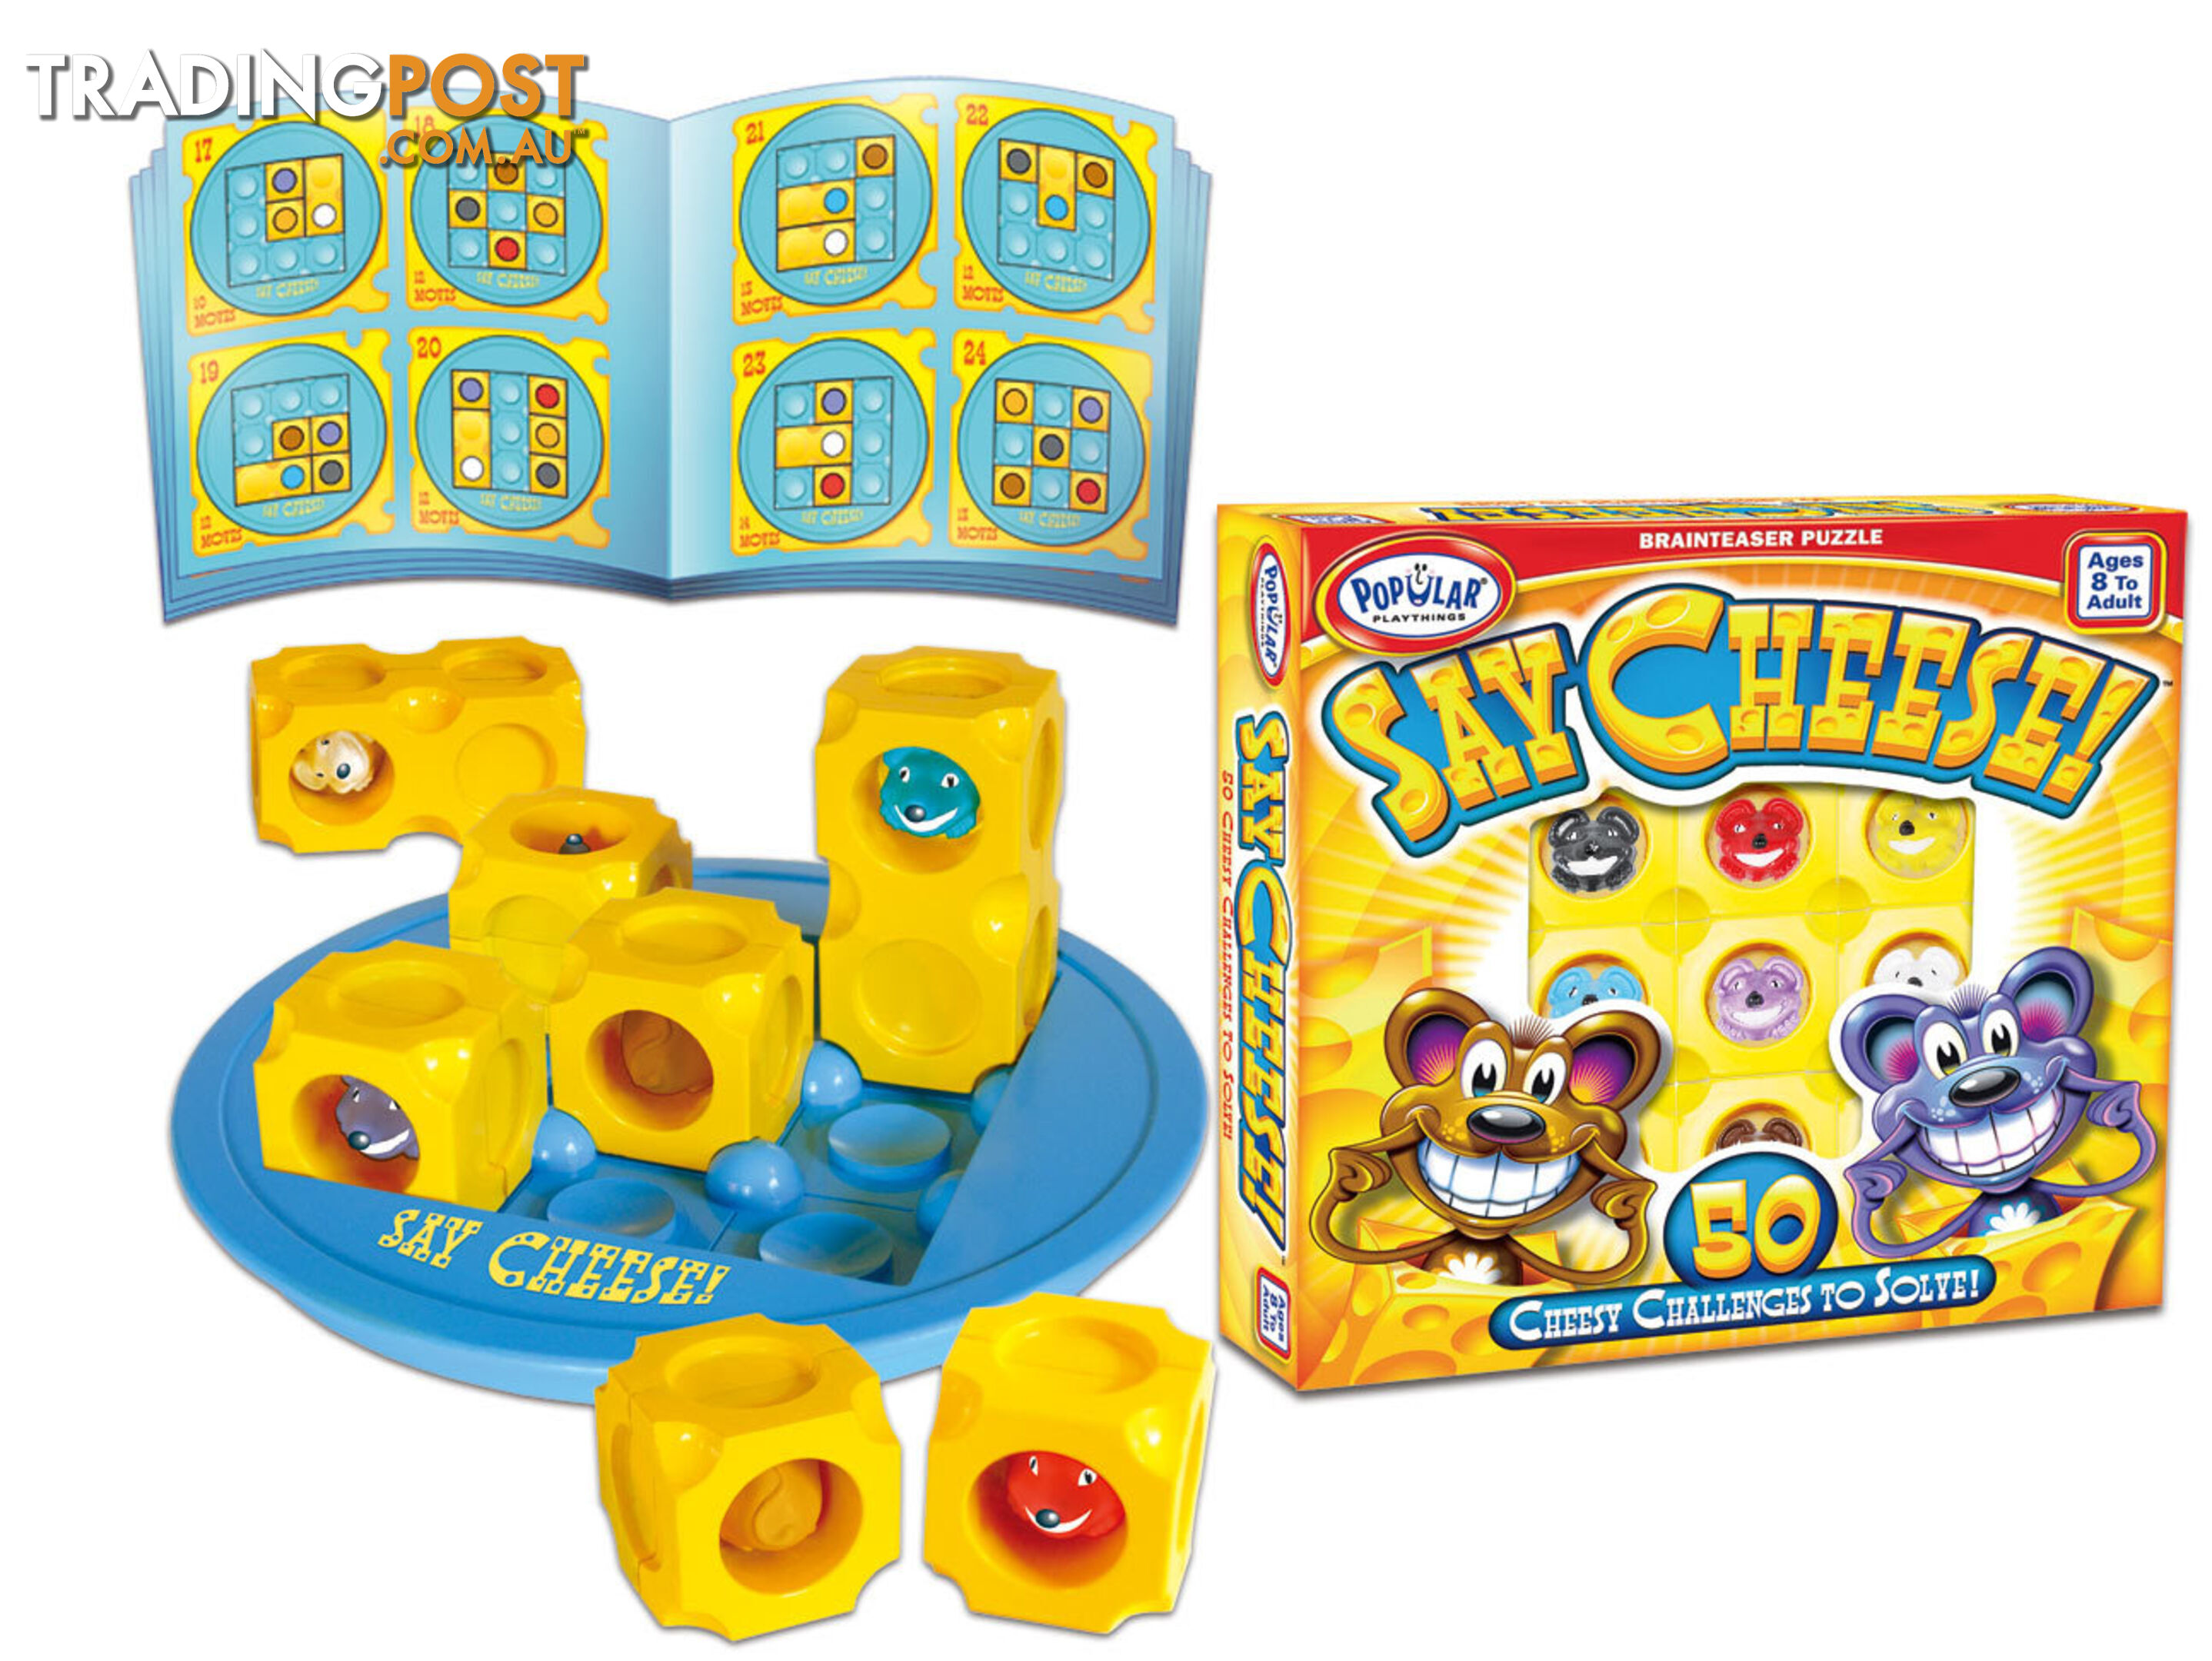 Say Cheese - Popular Playthings - 755828704301